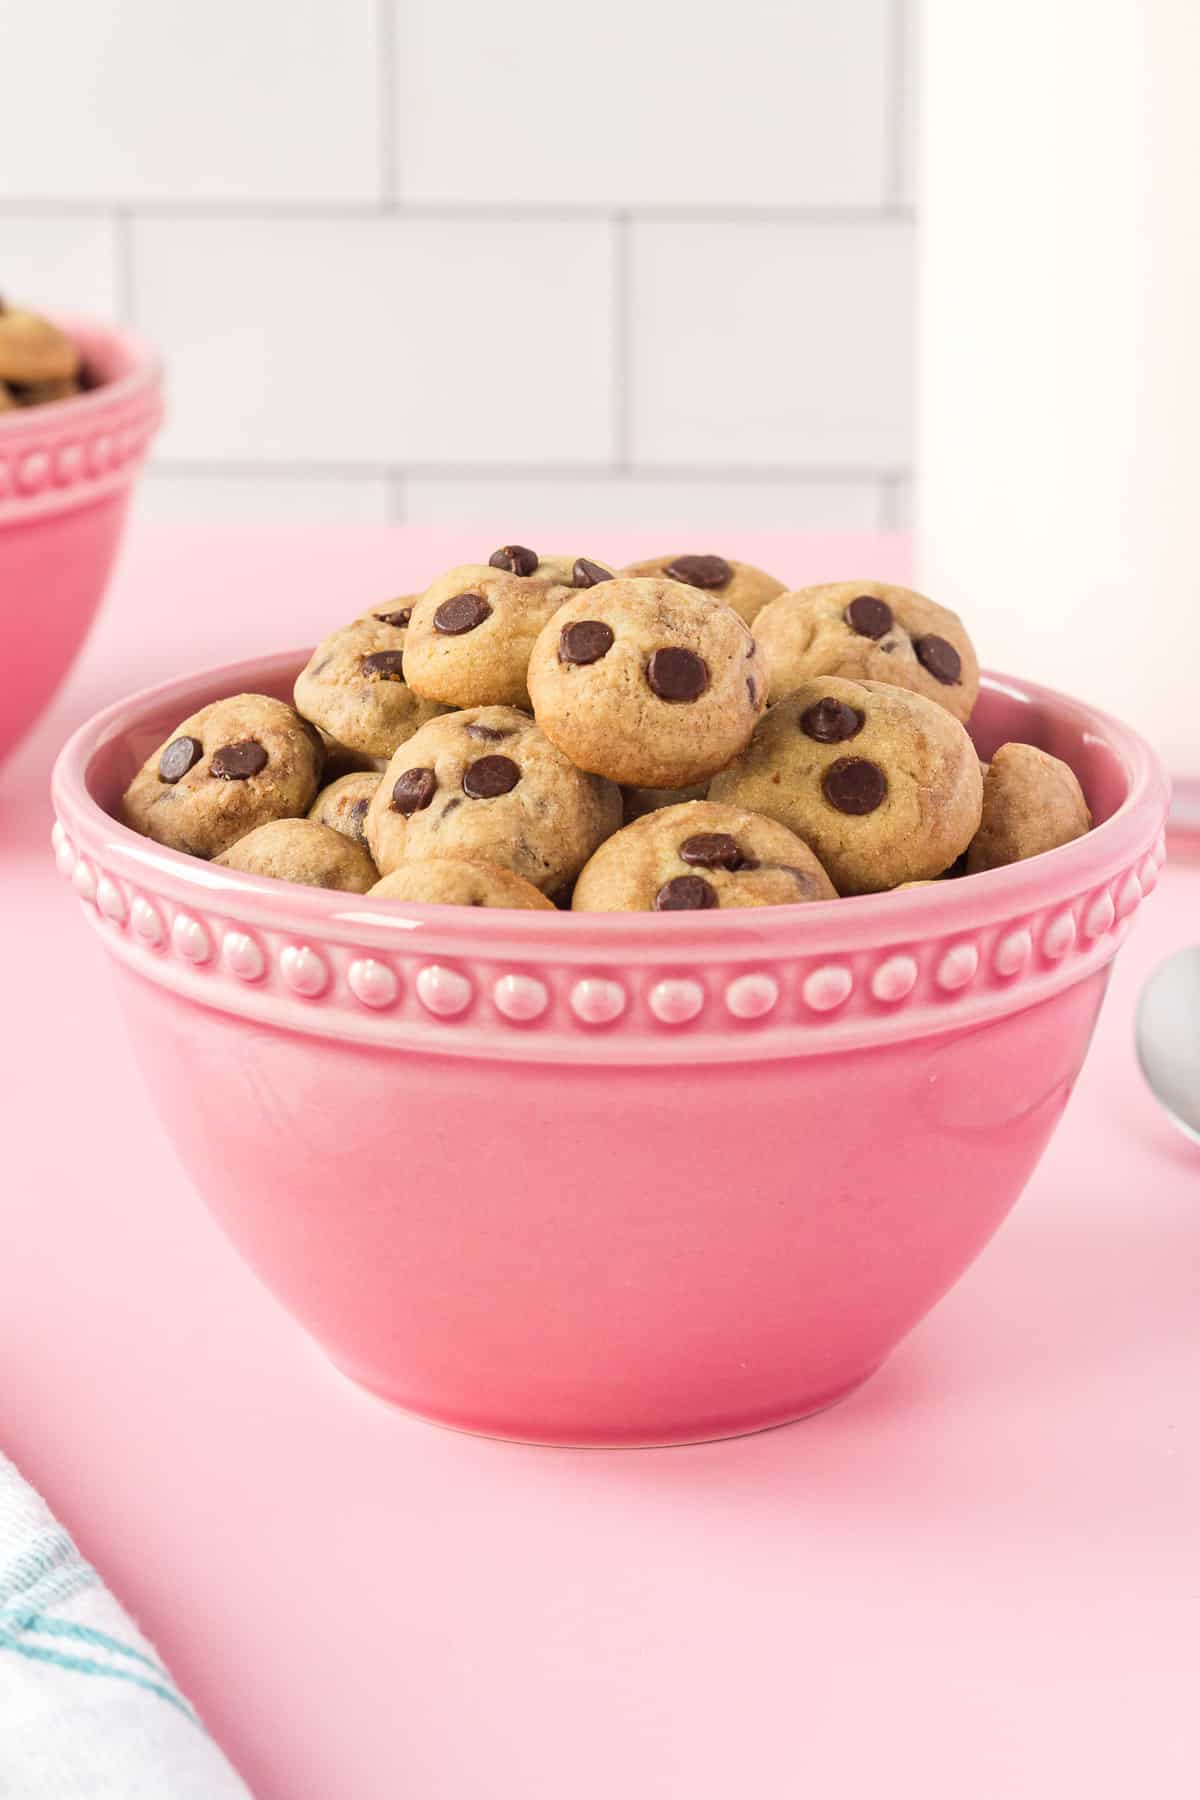 Cookie cereal in a bright pink bowl on pink background.